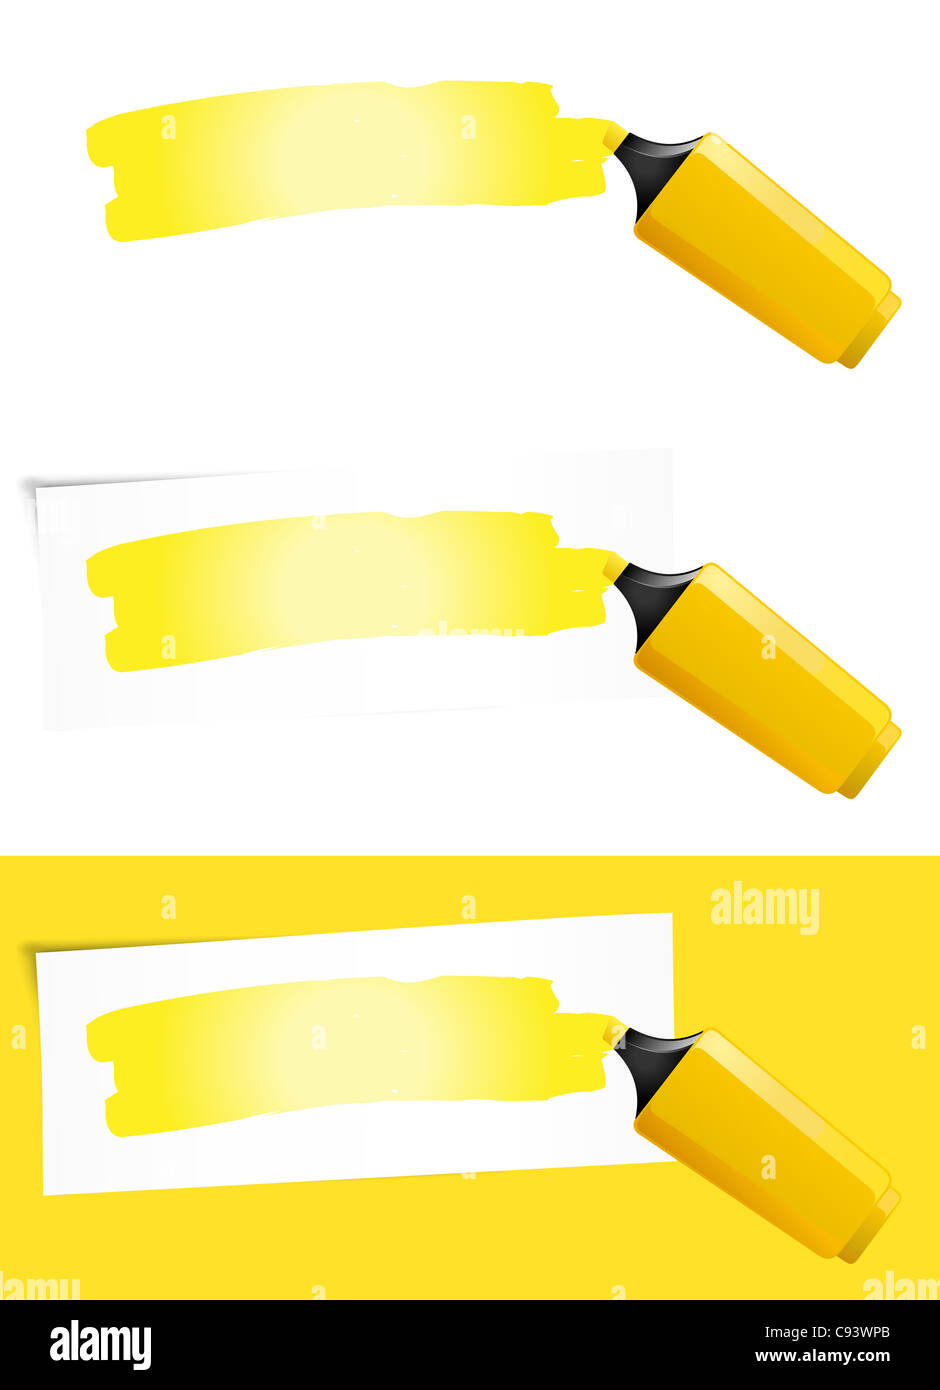 Illustration of a yellow felt tip pen highlighting background paper for your advertisement sign Stock Photo